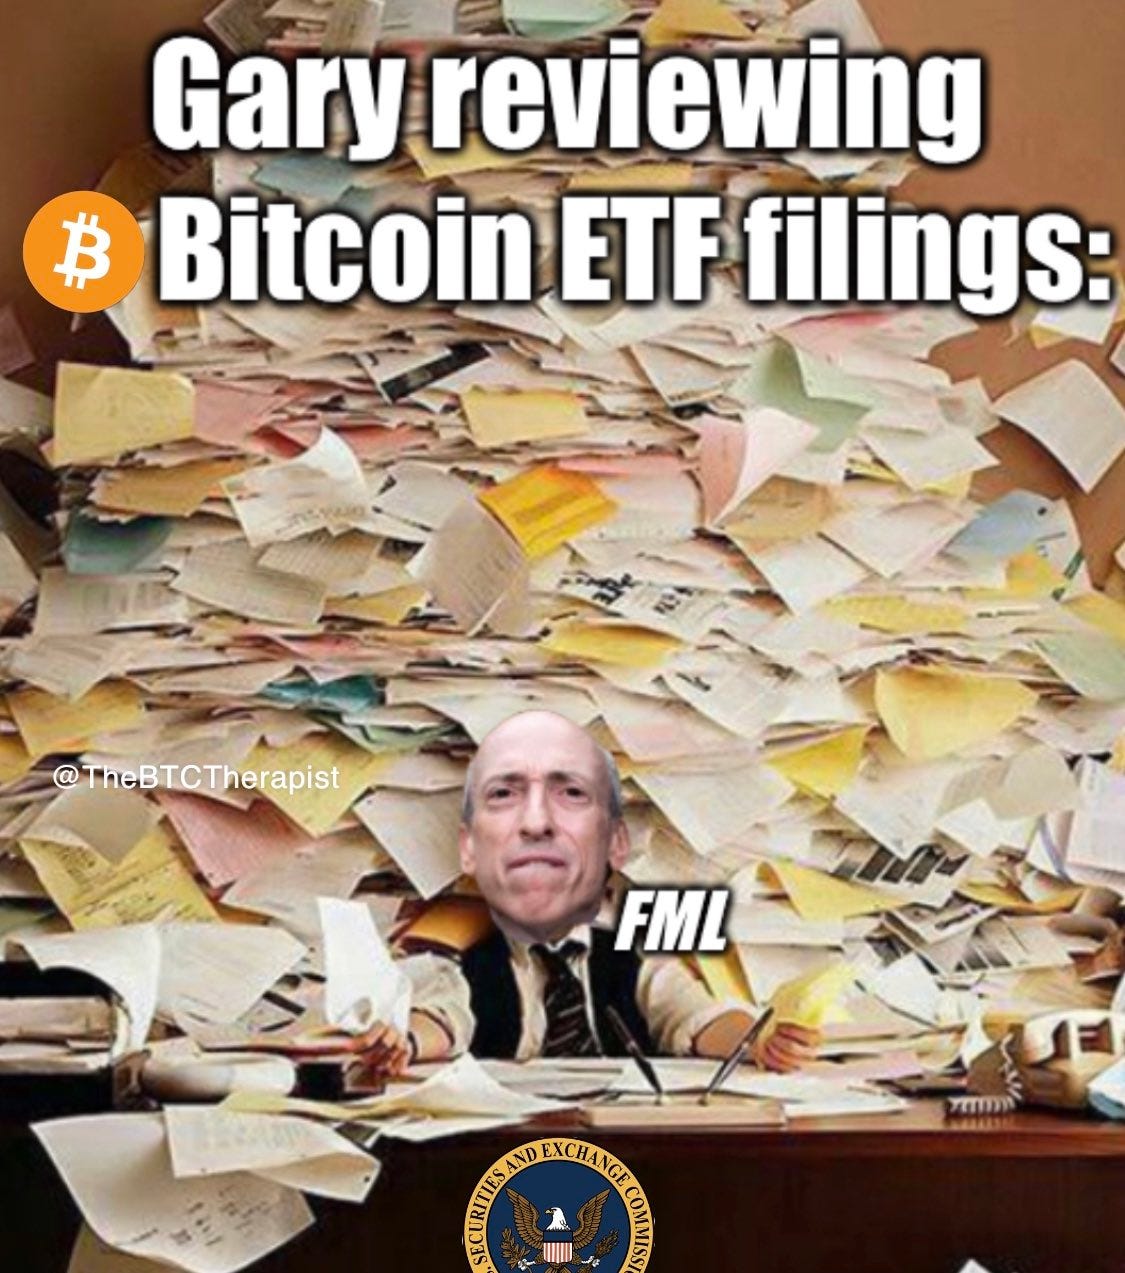 The ₿itcoin Therapist on X: "BlackRock just resubmitted an updated #Bitcoin  ETF filing at the SEC. Gary Gensler is flooded with applications. There's  no where left to run, Gary. https://t.co/q5ksbrgZ1M" / X